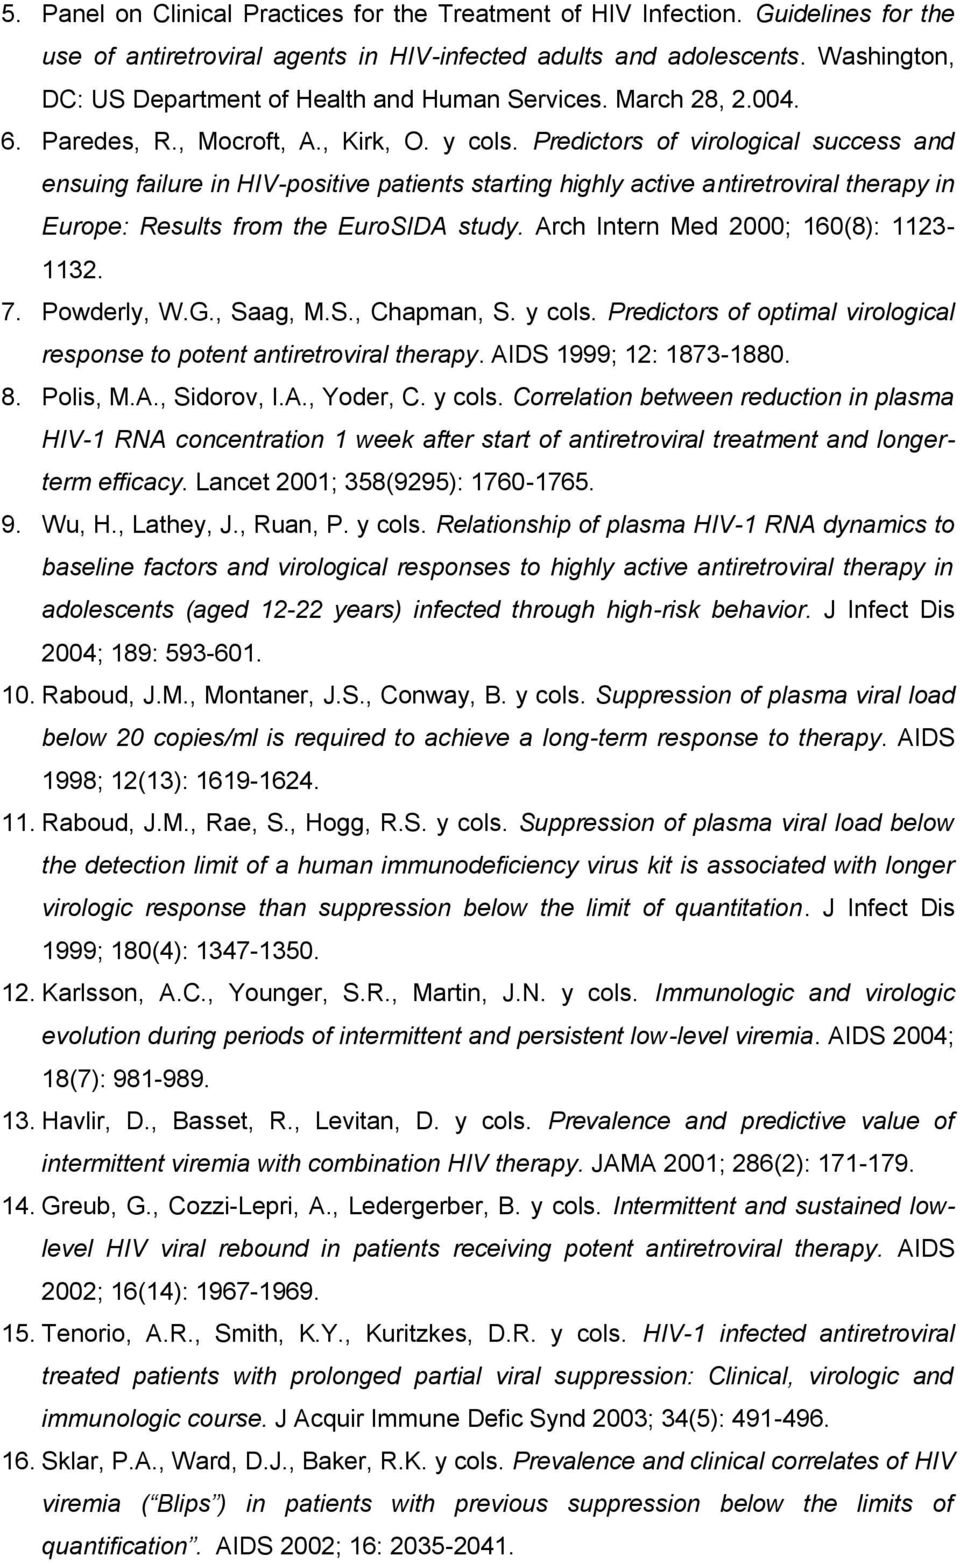 Predictors of virological success and ensuing failure in HIV-positive patients starting highly active antiretroviral therapy in Europe: Results from the EuroSIDA study.